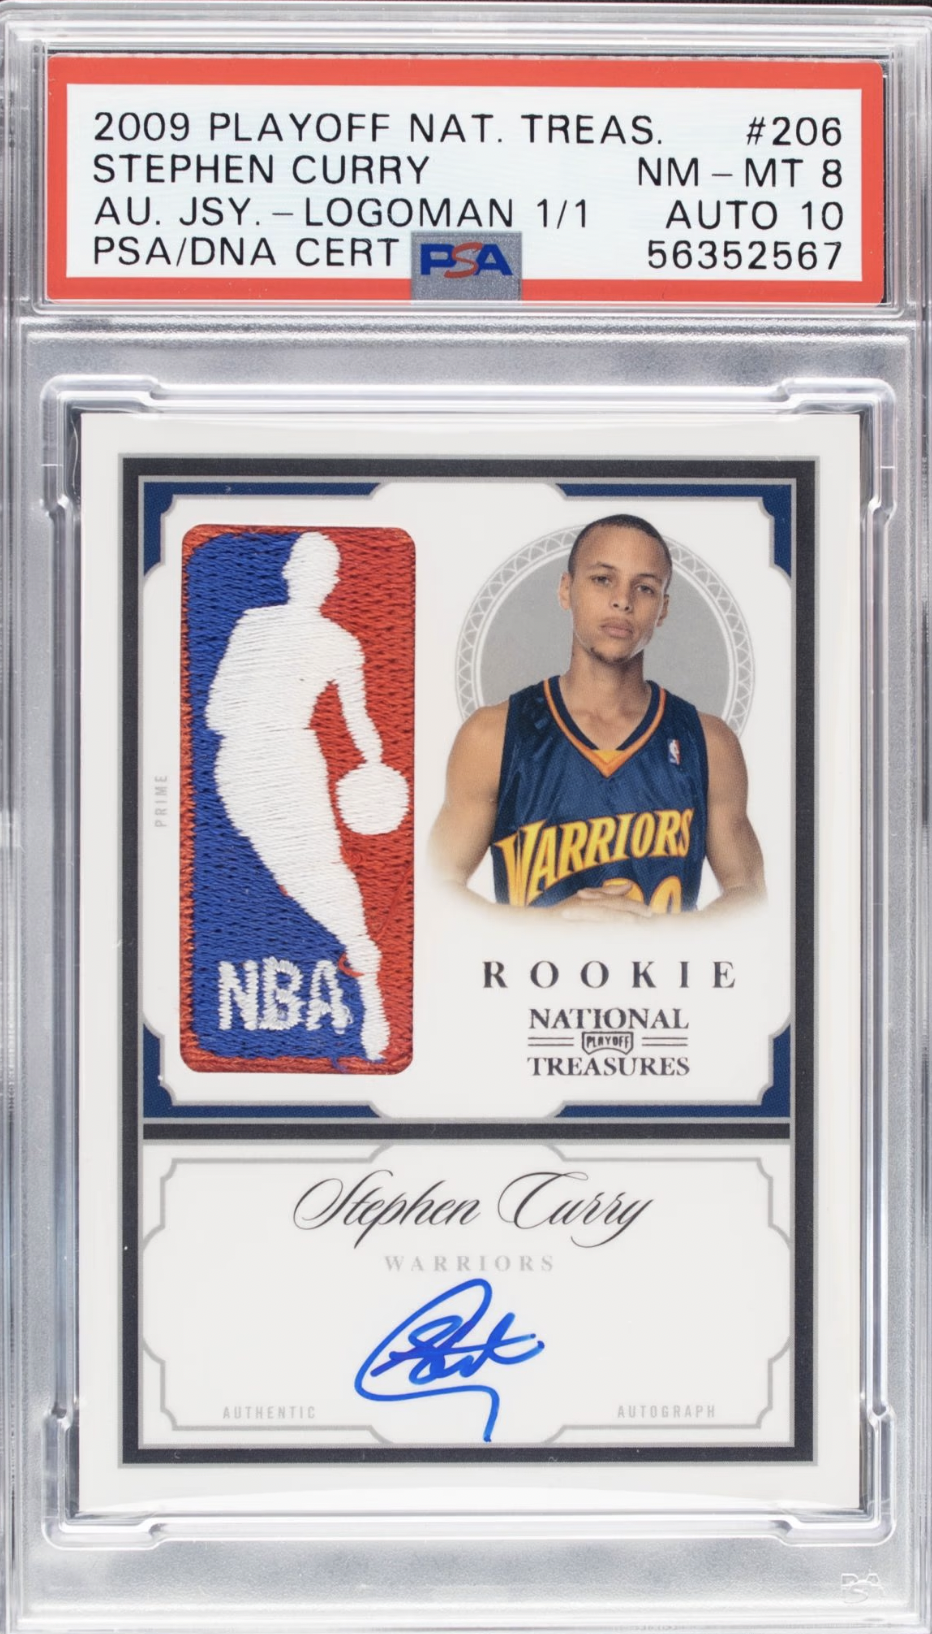 What Nba Trading Cards Are Worth Money?